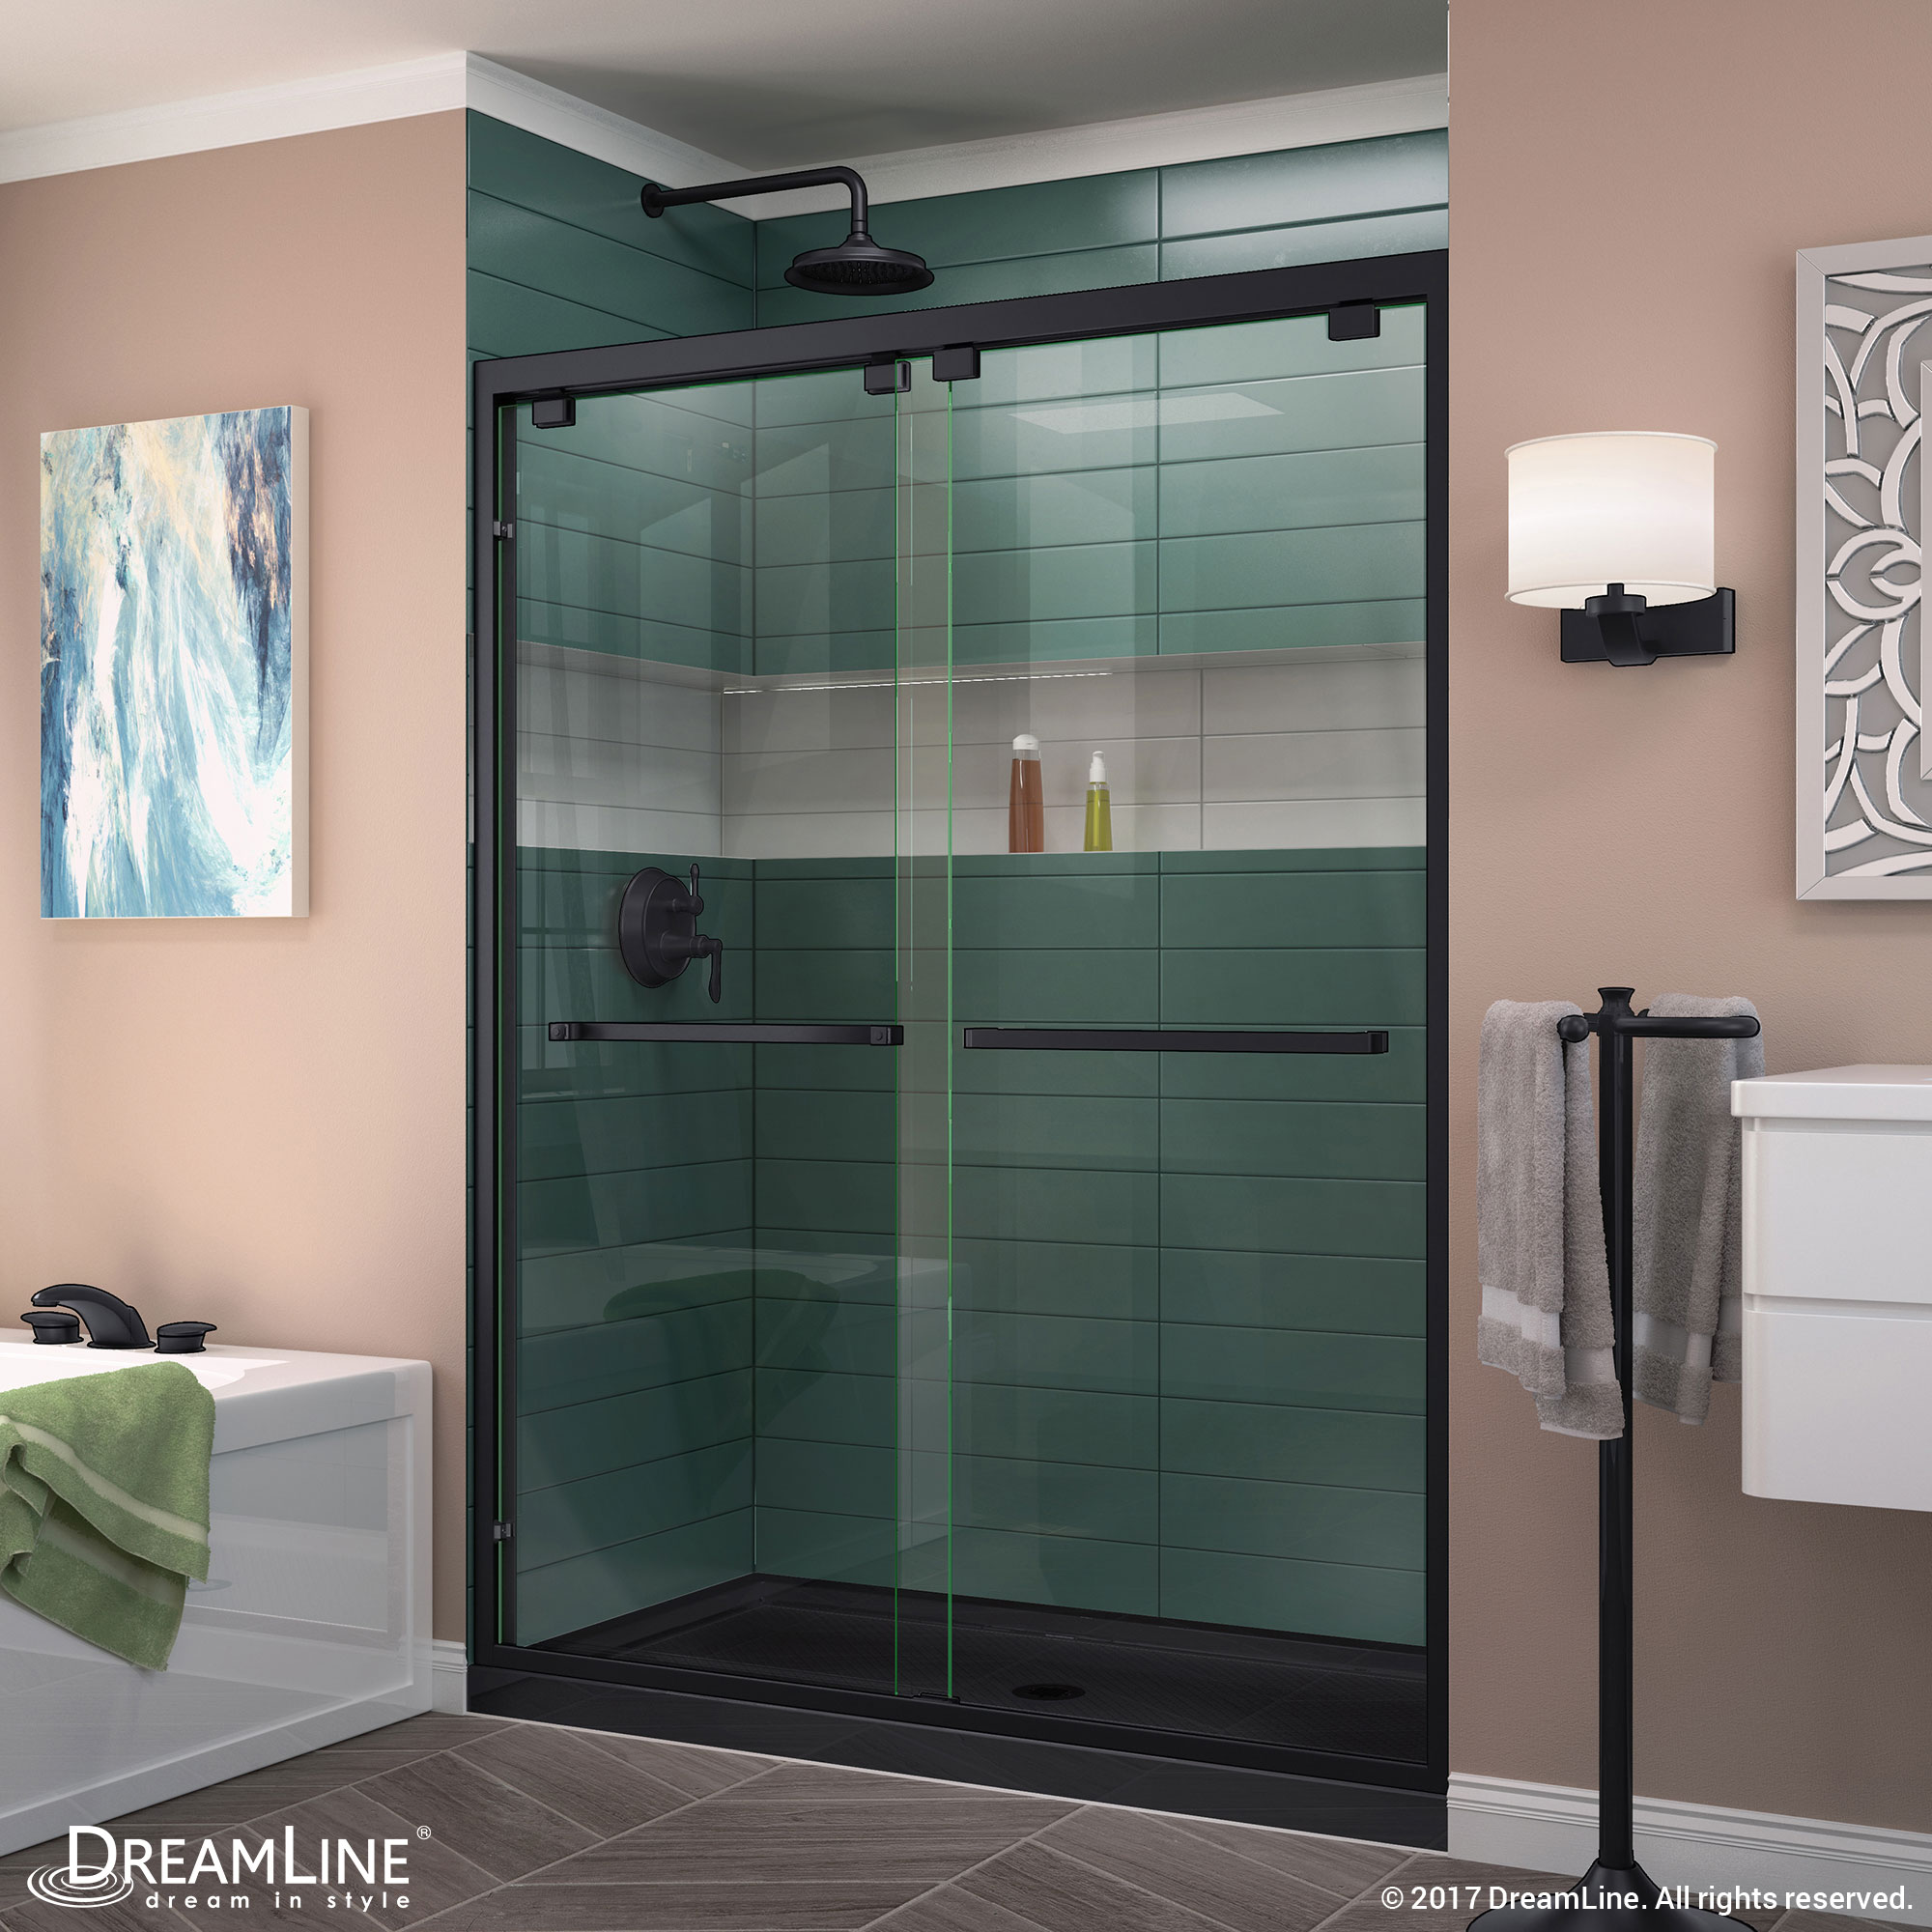 DreamLine Encore 32 in. D x 54 in. W x 78 3/4 in. H Bypass Shower Door in Chrome and Center Drain Black Base Kit